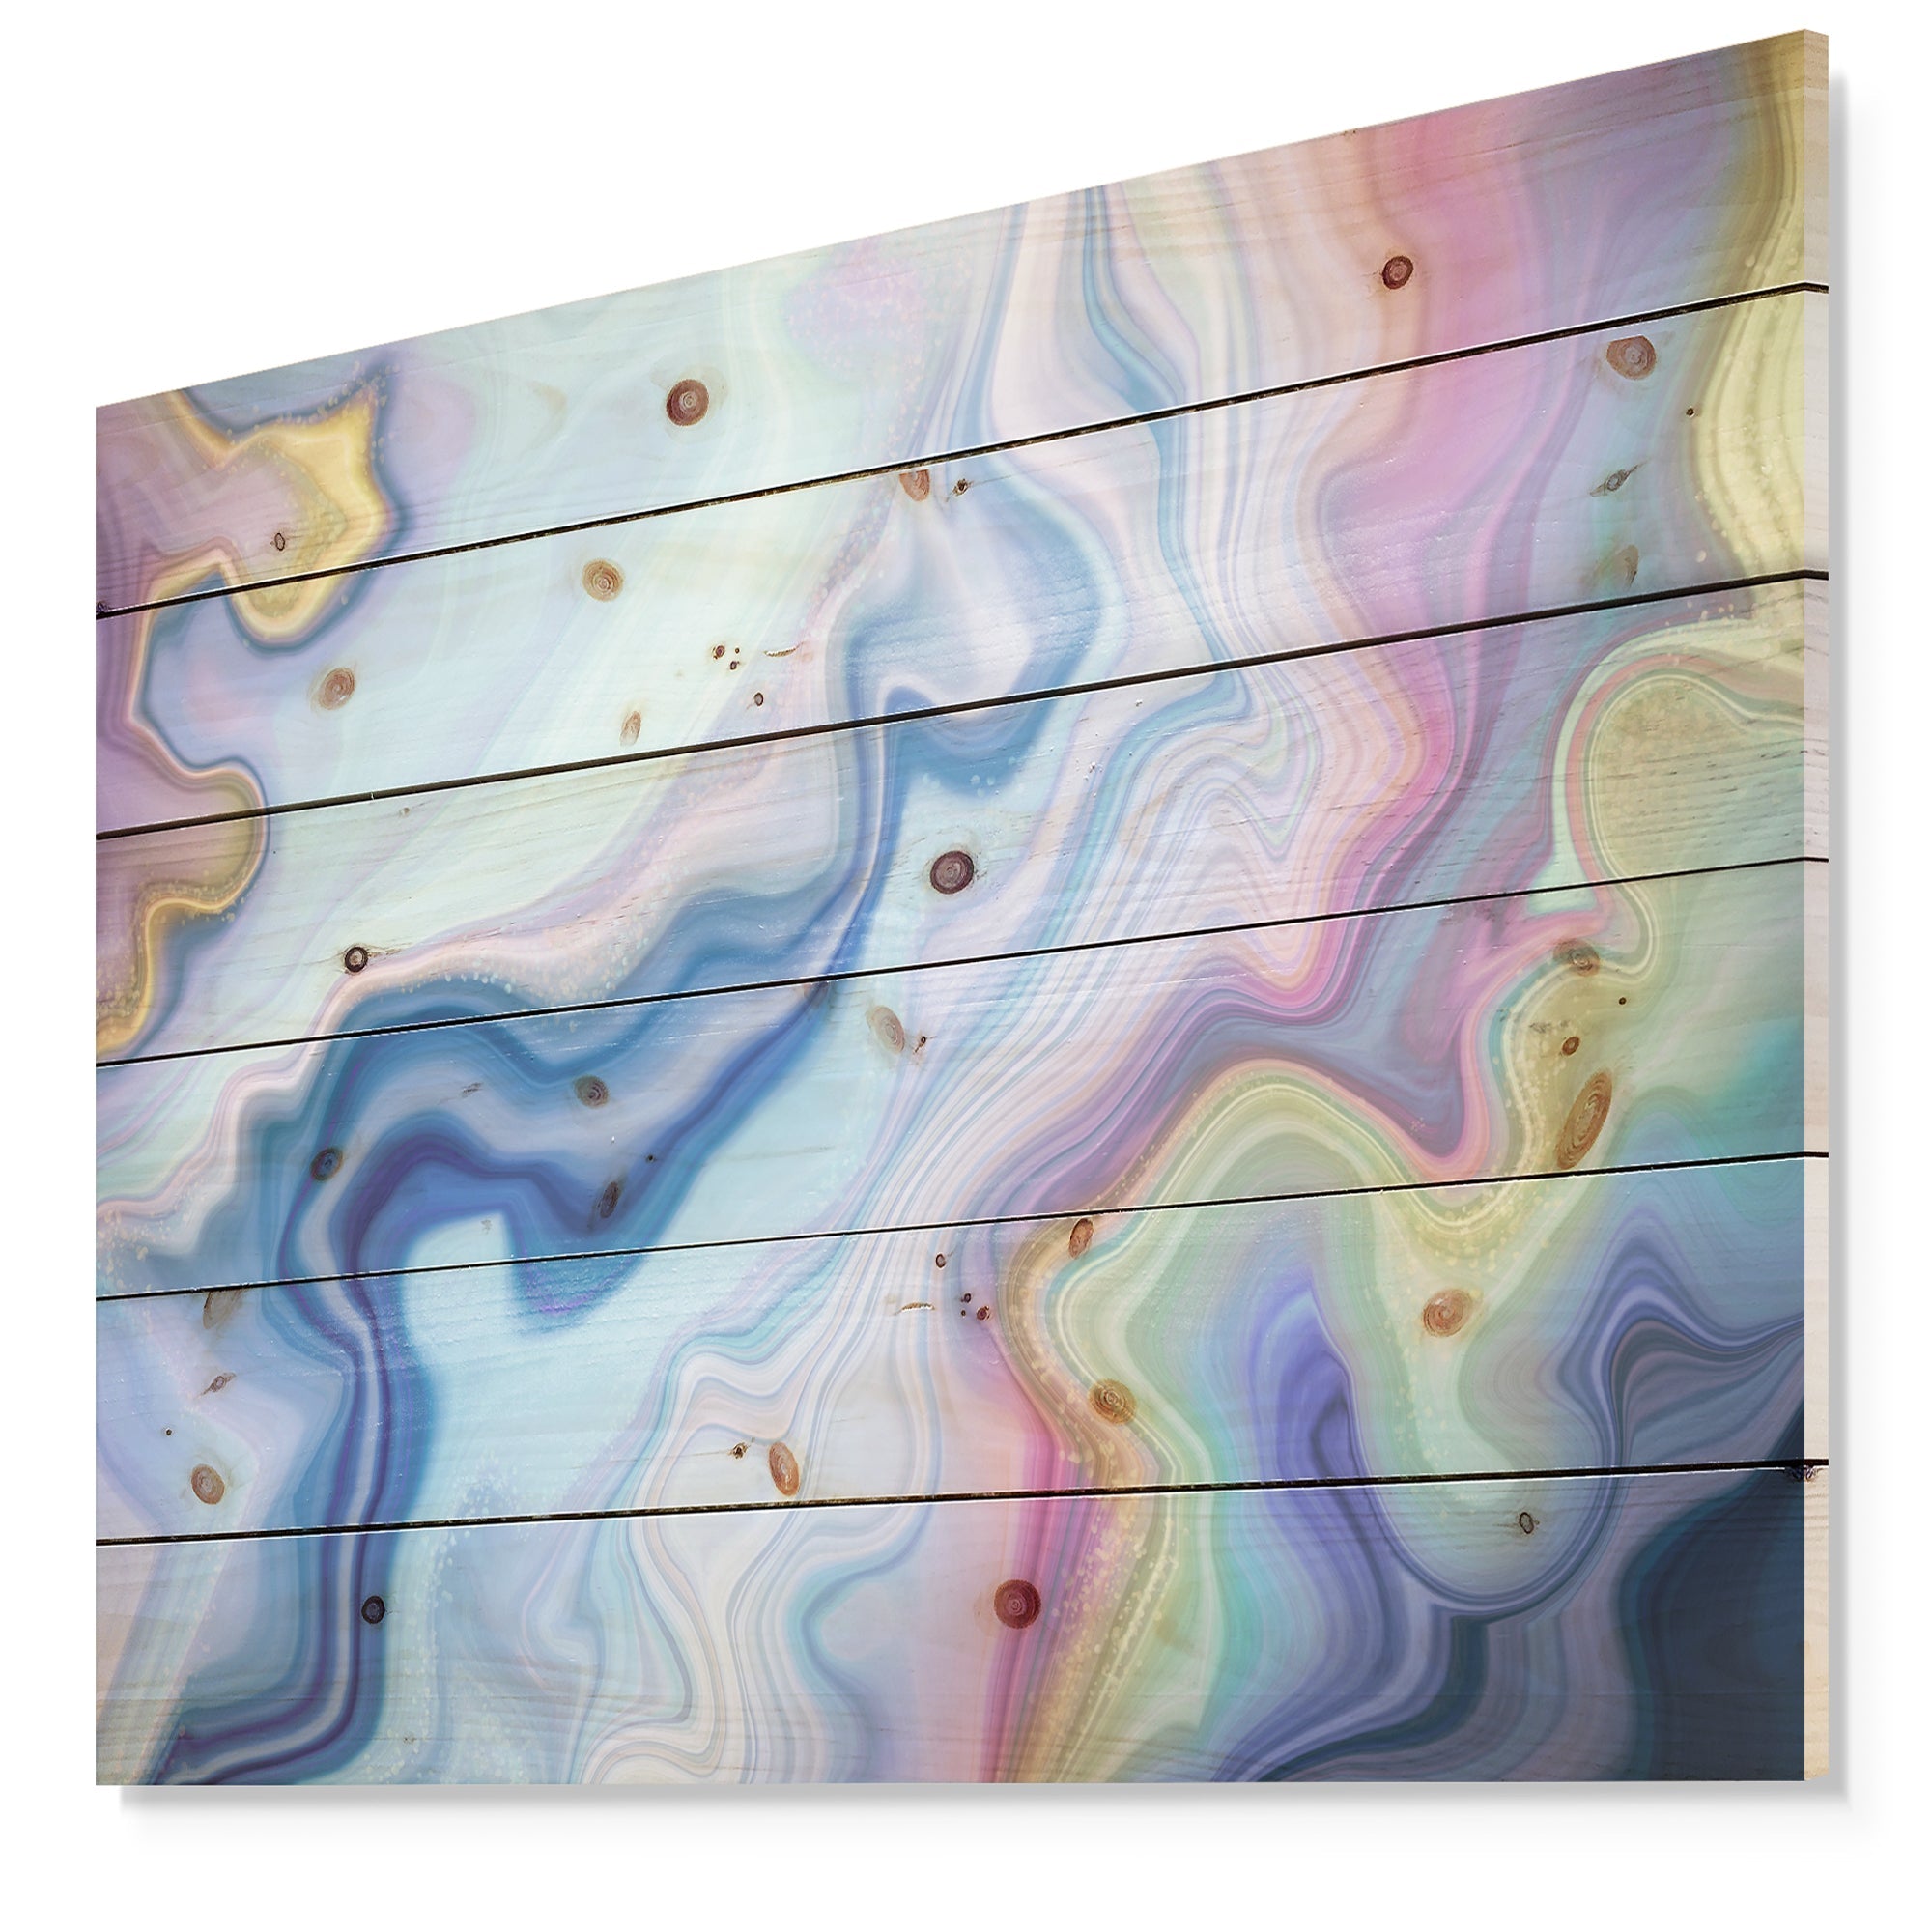 Abstract marbled - Stone Photographic Print on Natural Pine Wood